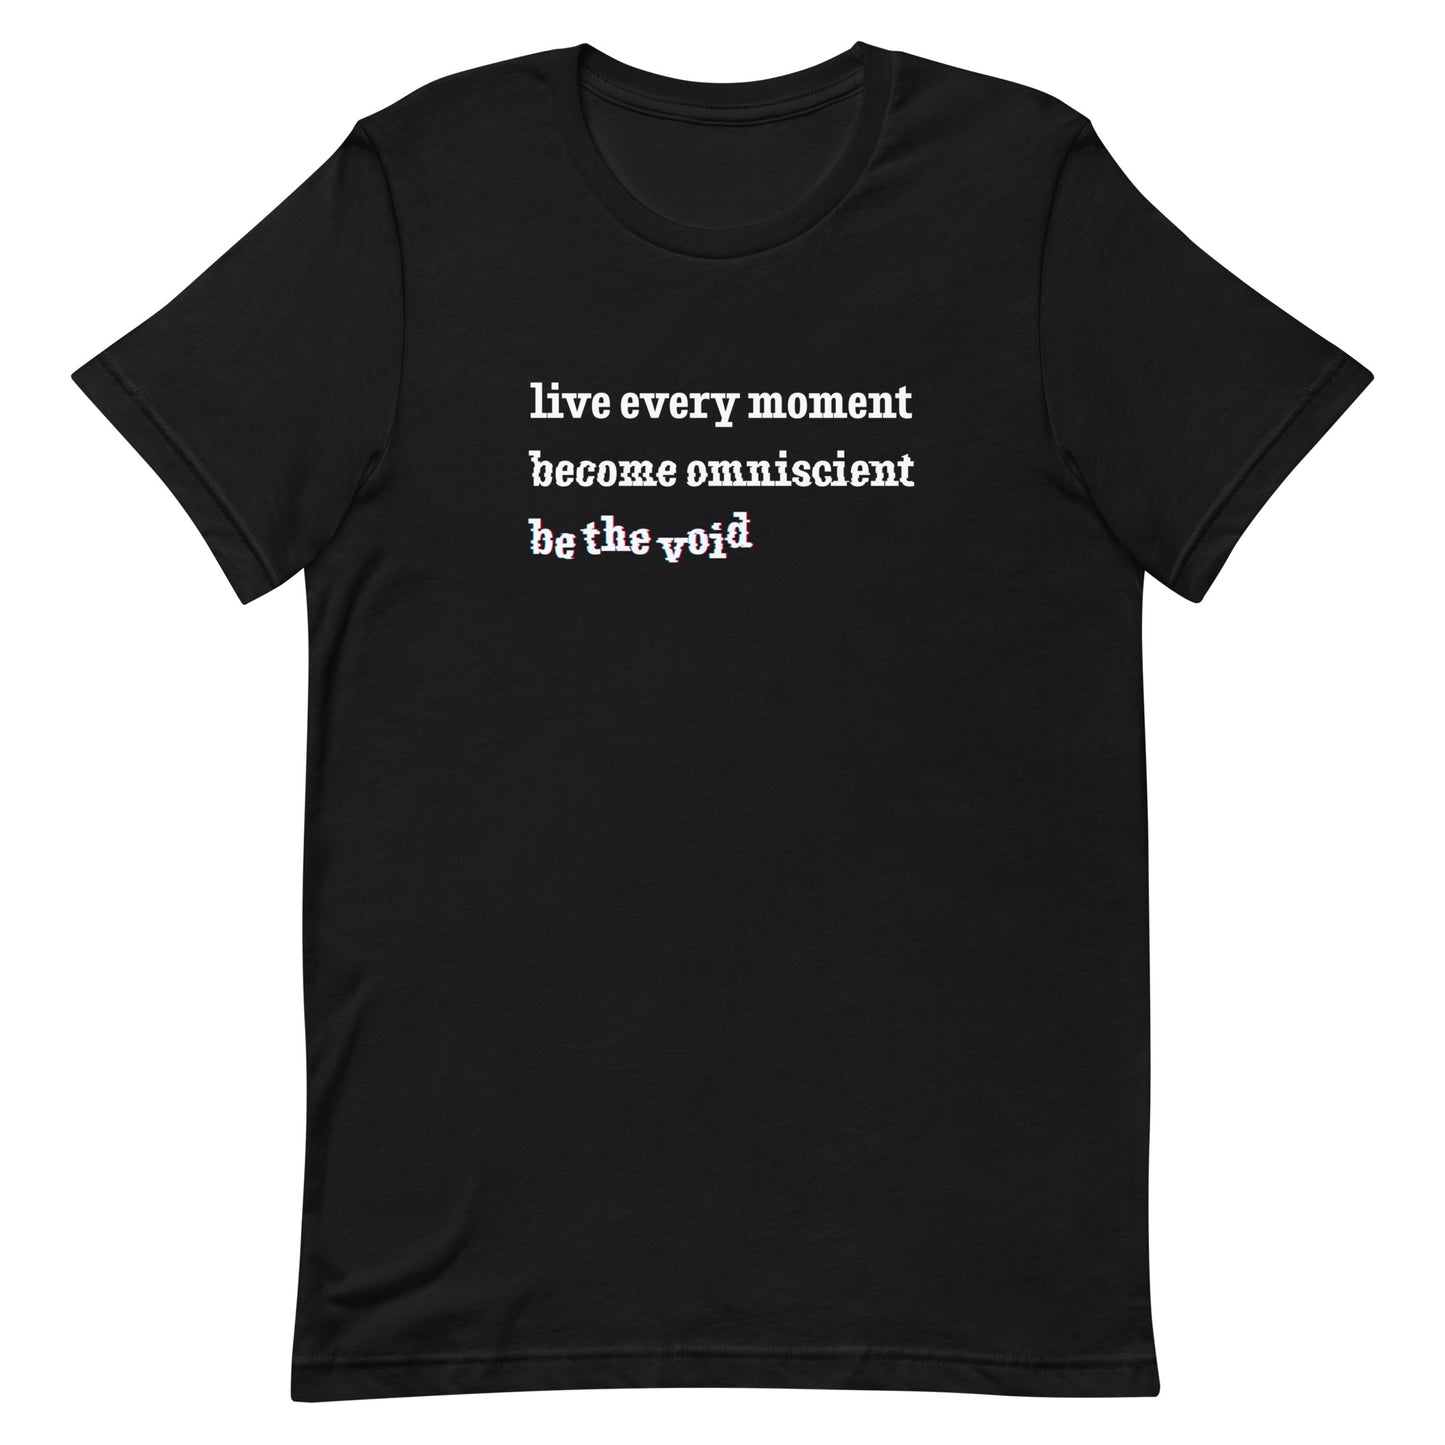 A black crewneck t-shirt featuring text reading "live every moment, become omniscient, be the void" in an increasingly distorted font.